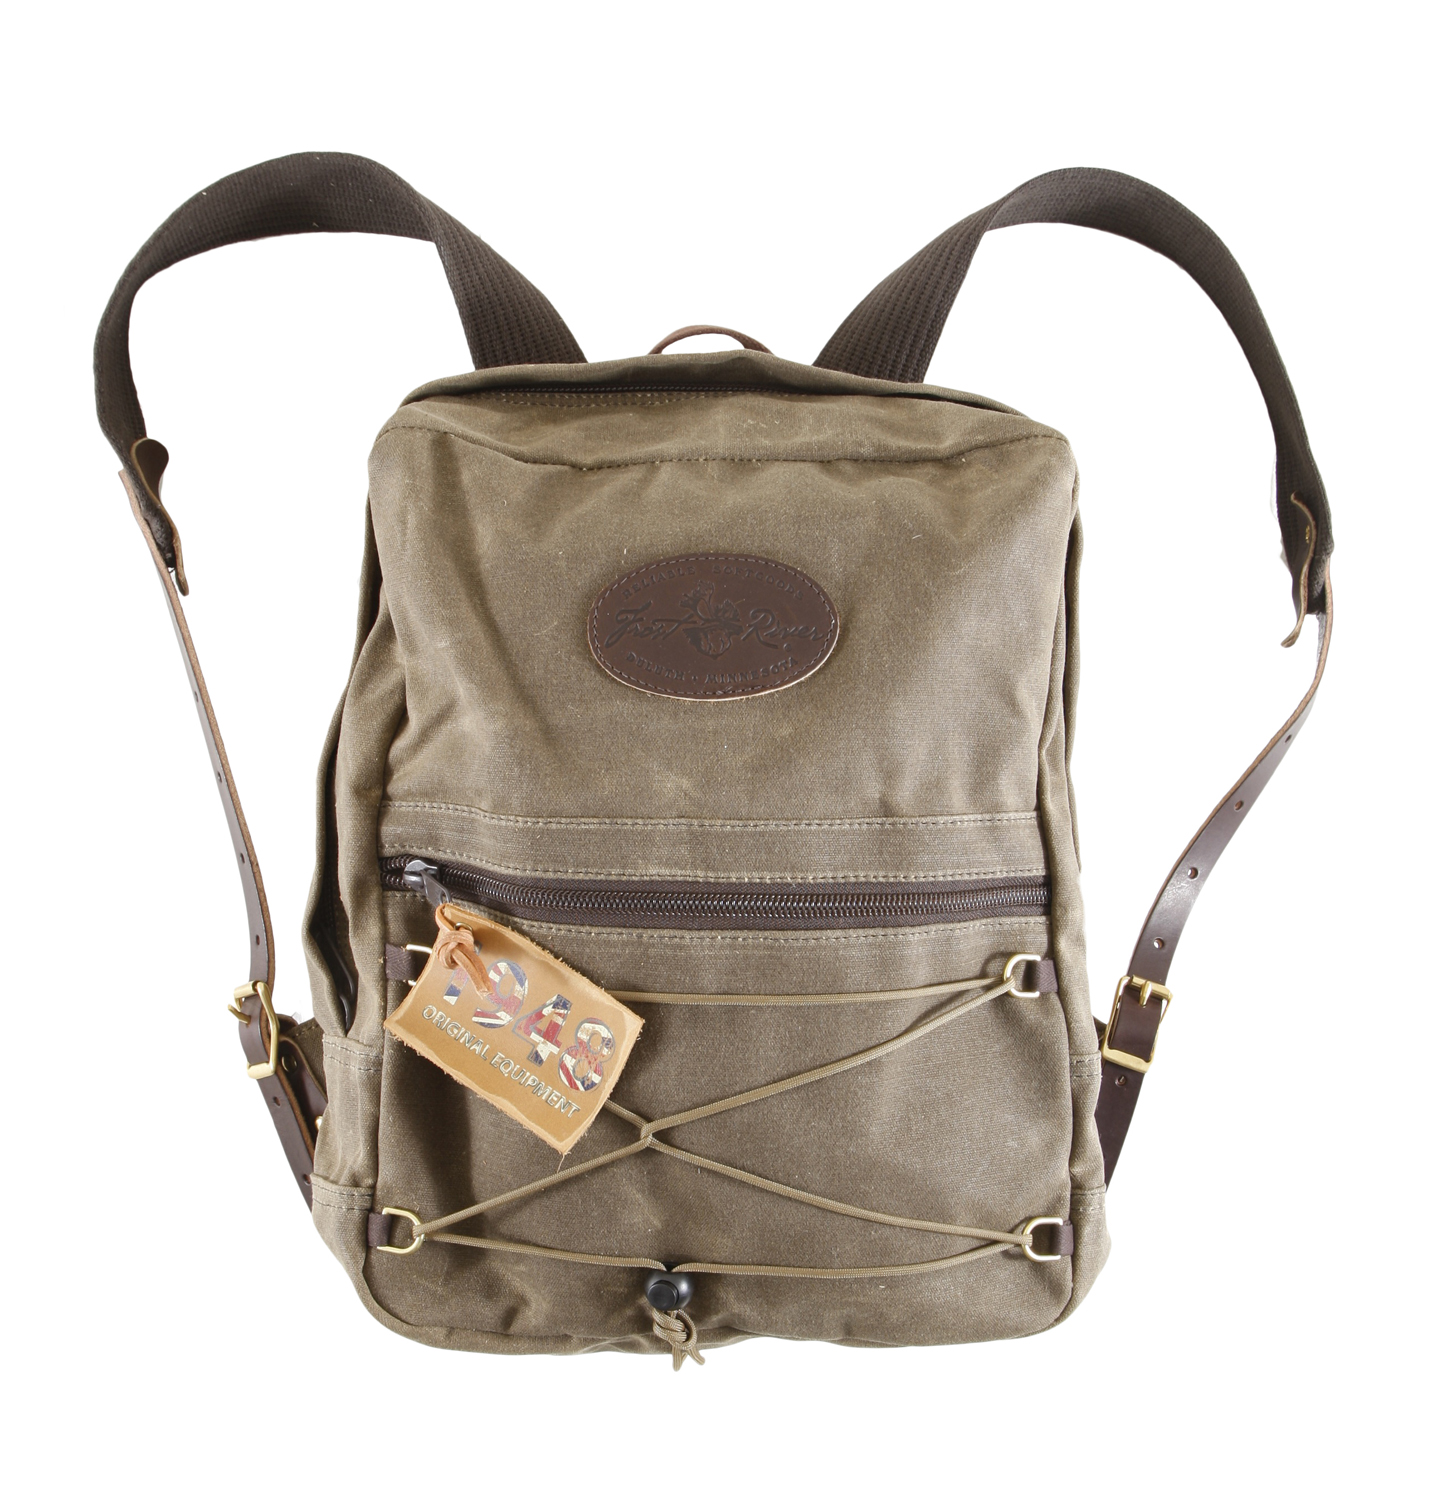 Itinerant Day Pack 